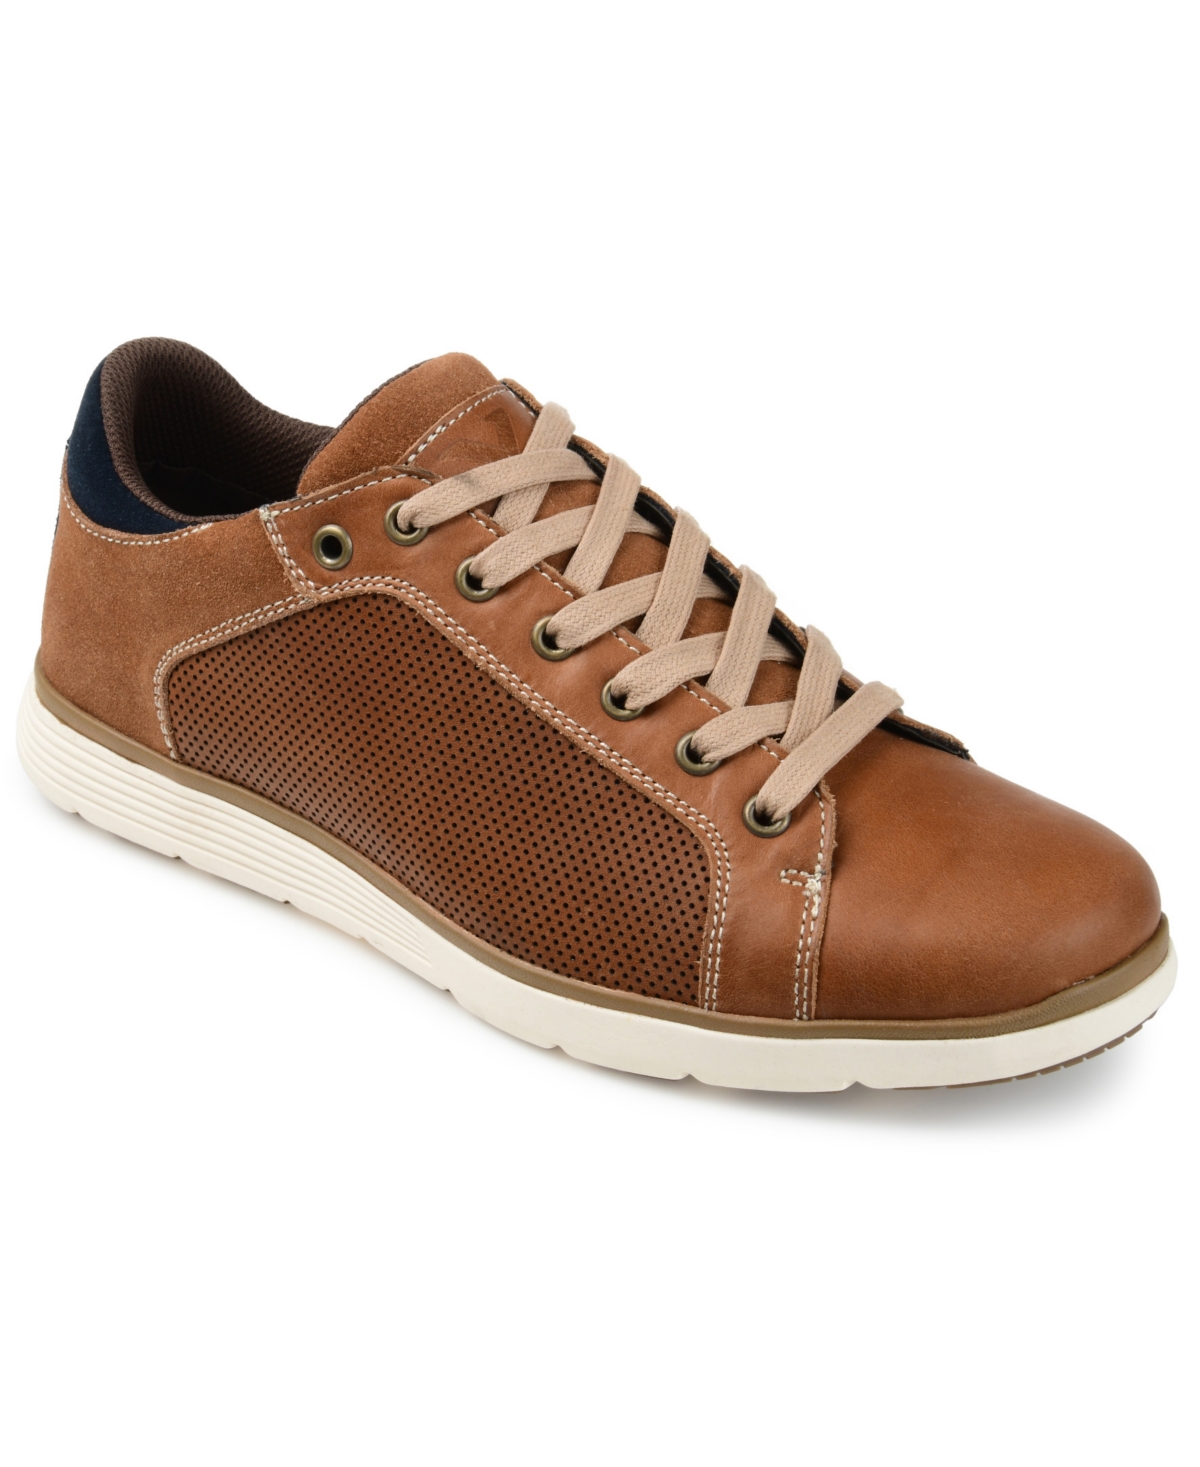 Men's Ramble Casual Leather Sneakers - Brown